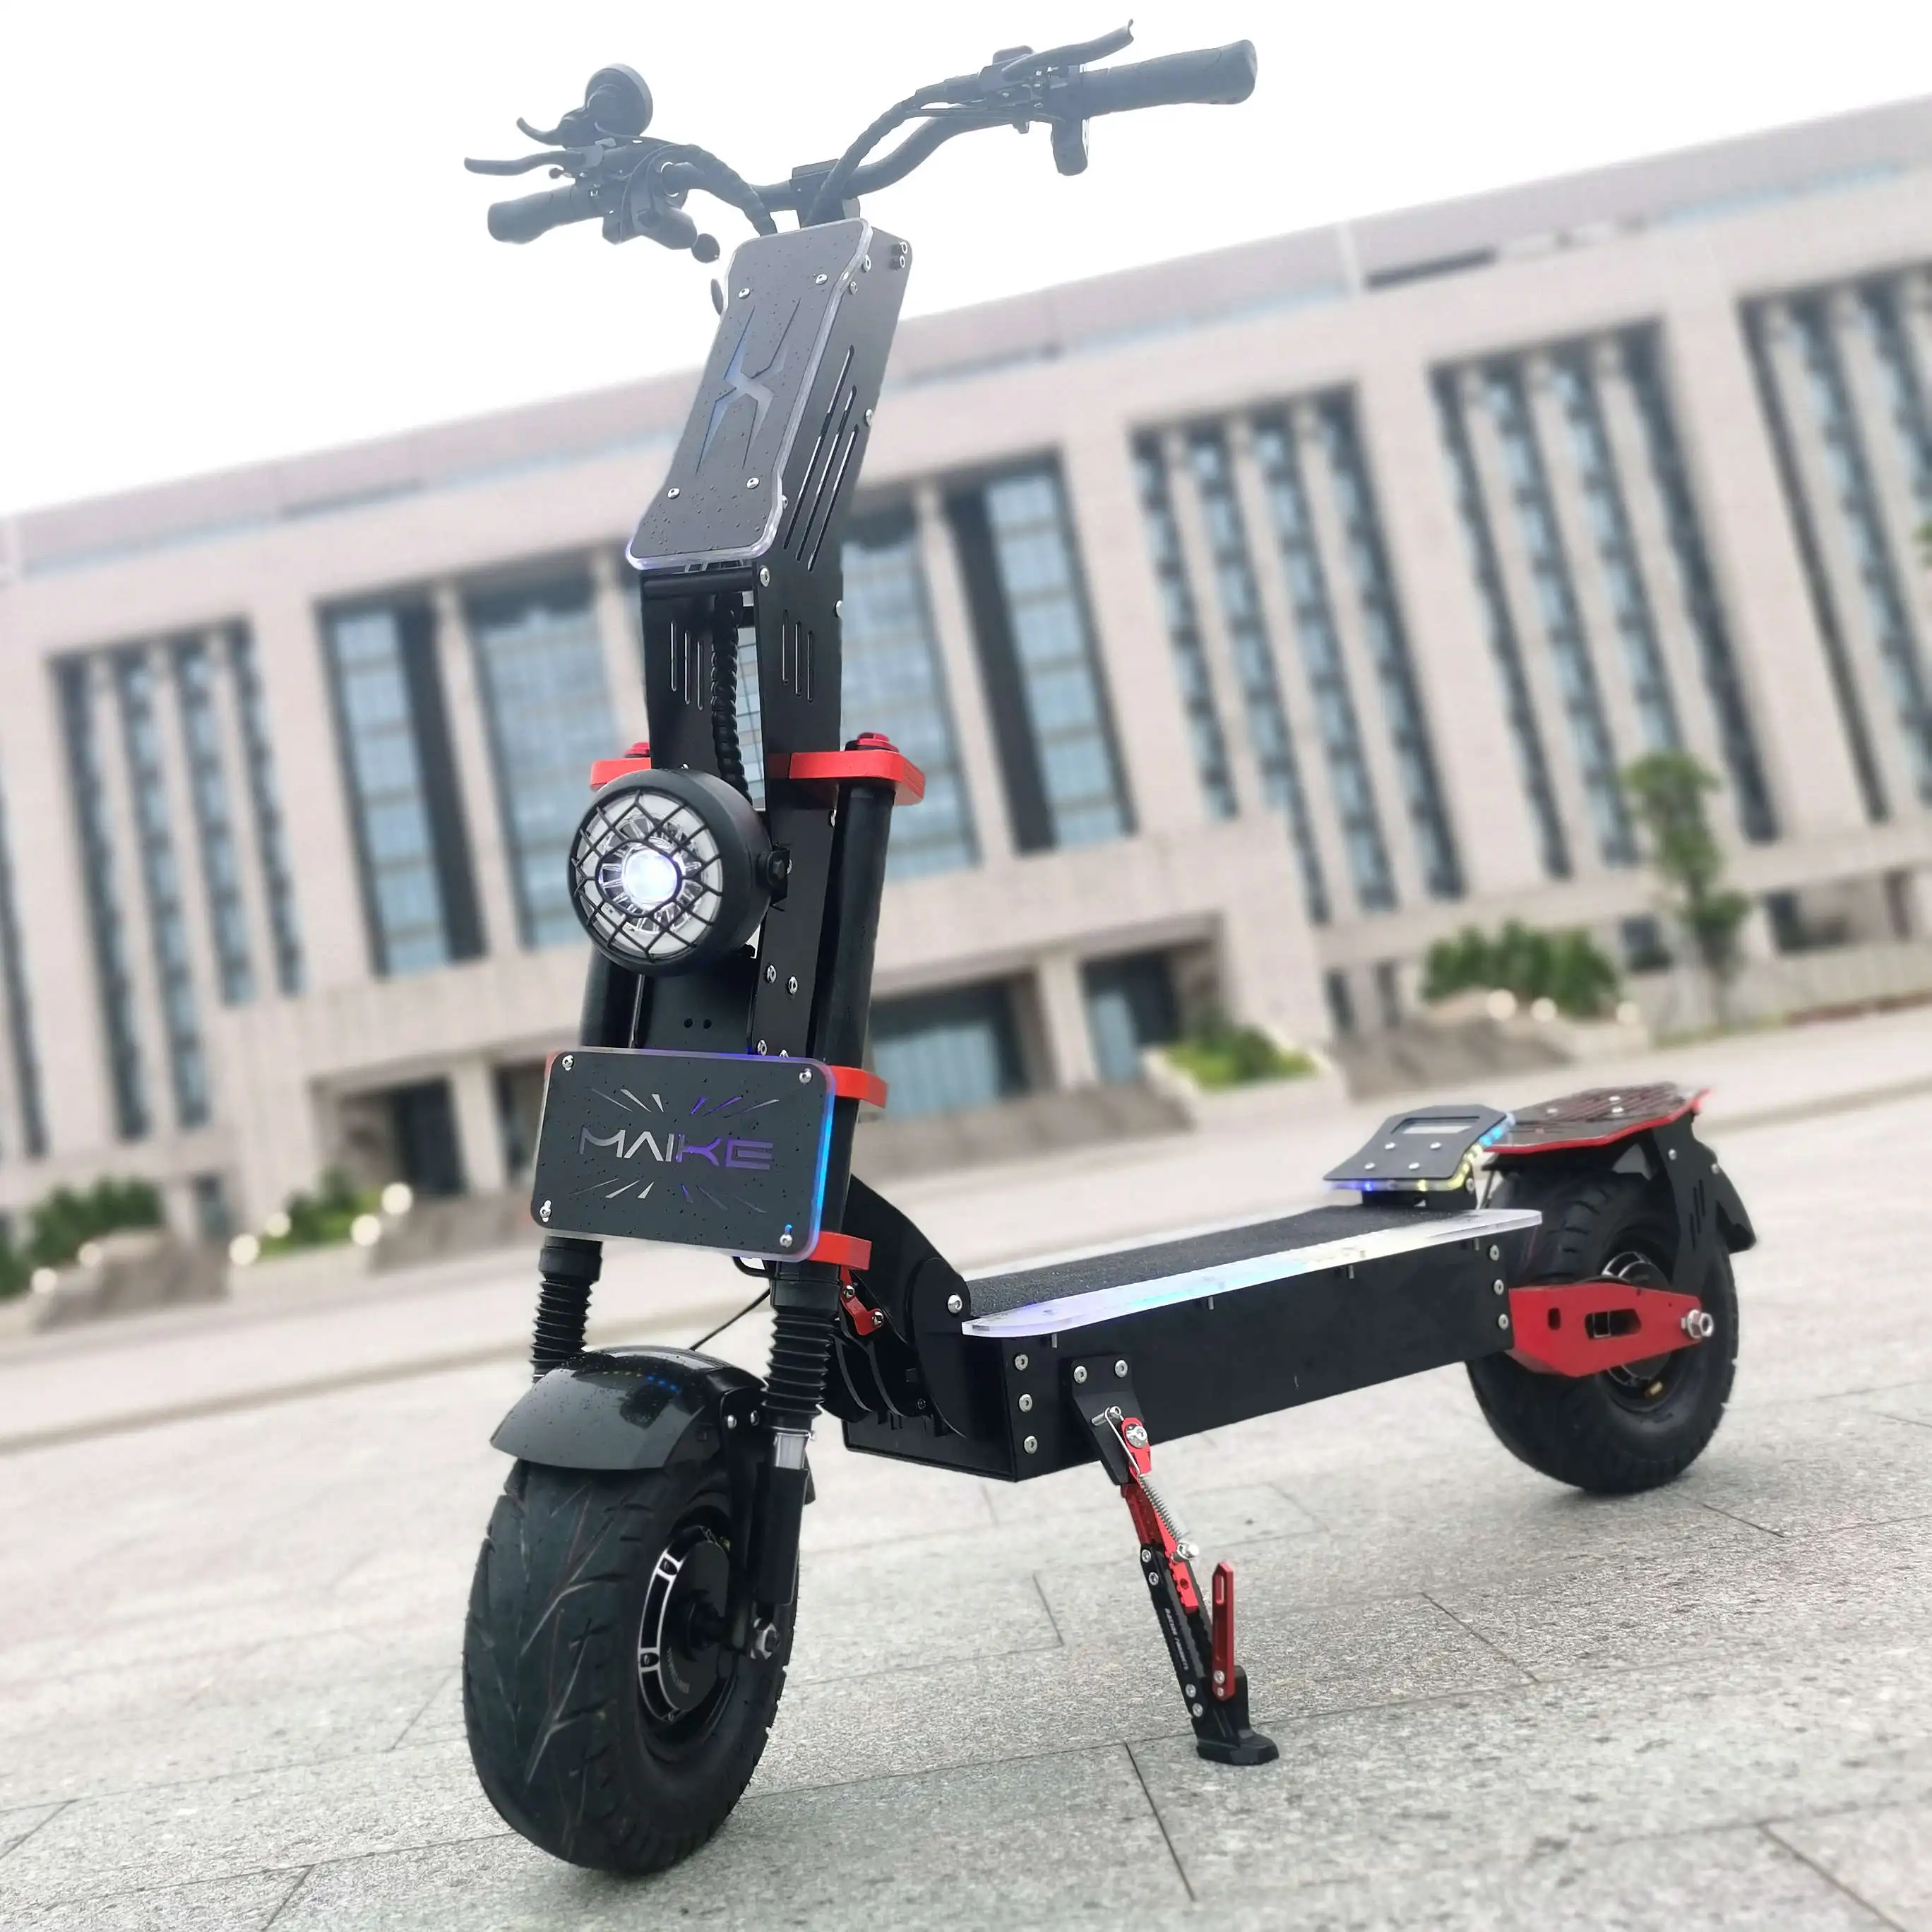 

Maike MKX new arrival Foldable Electric Motorcycle Scooter 60V 35AH 8000W 85km/h Black Motor Power for adult